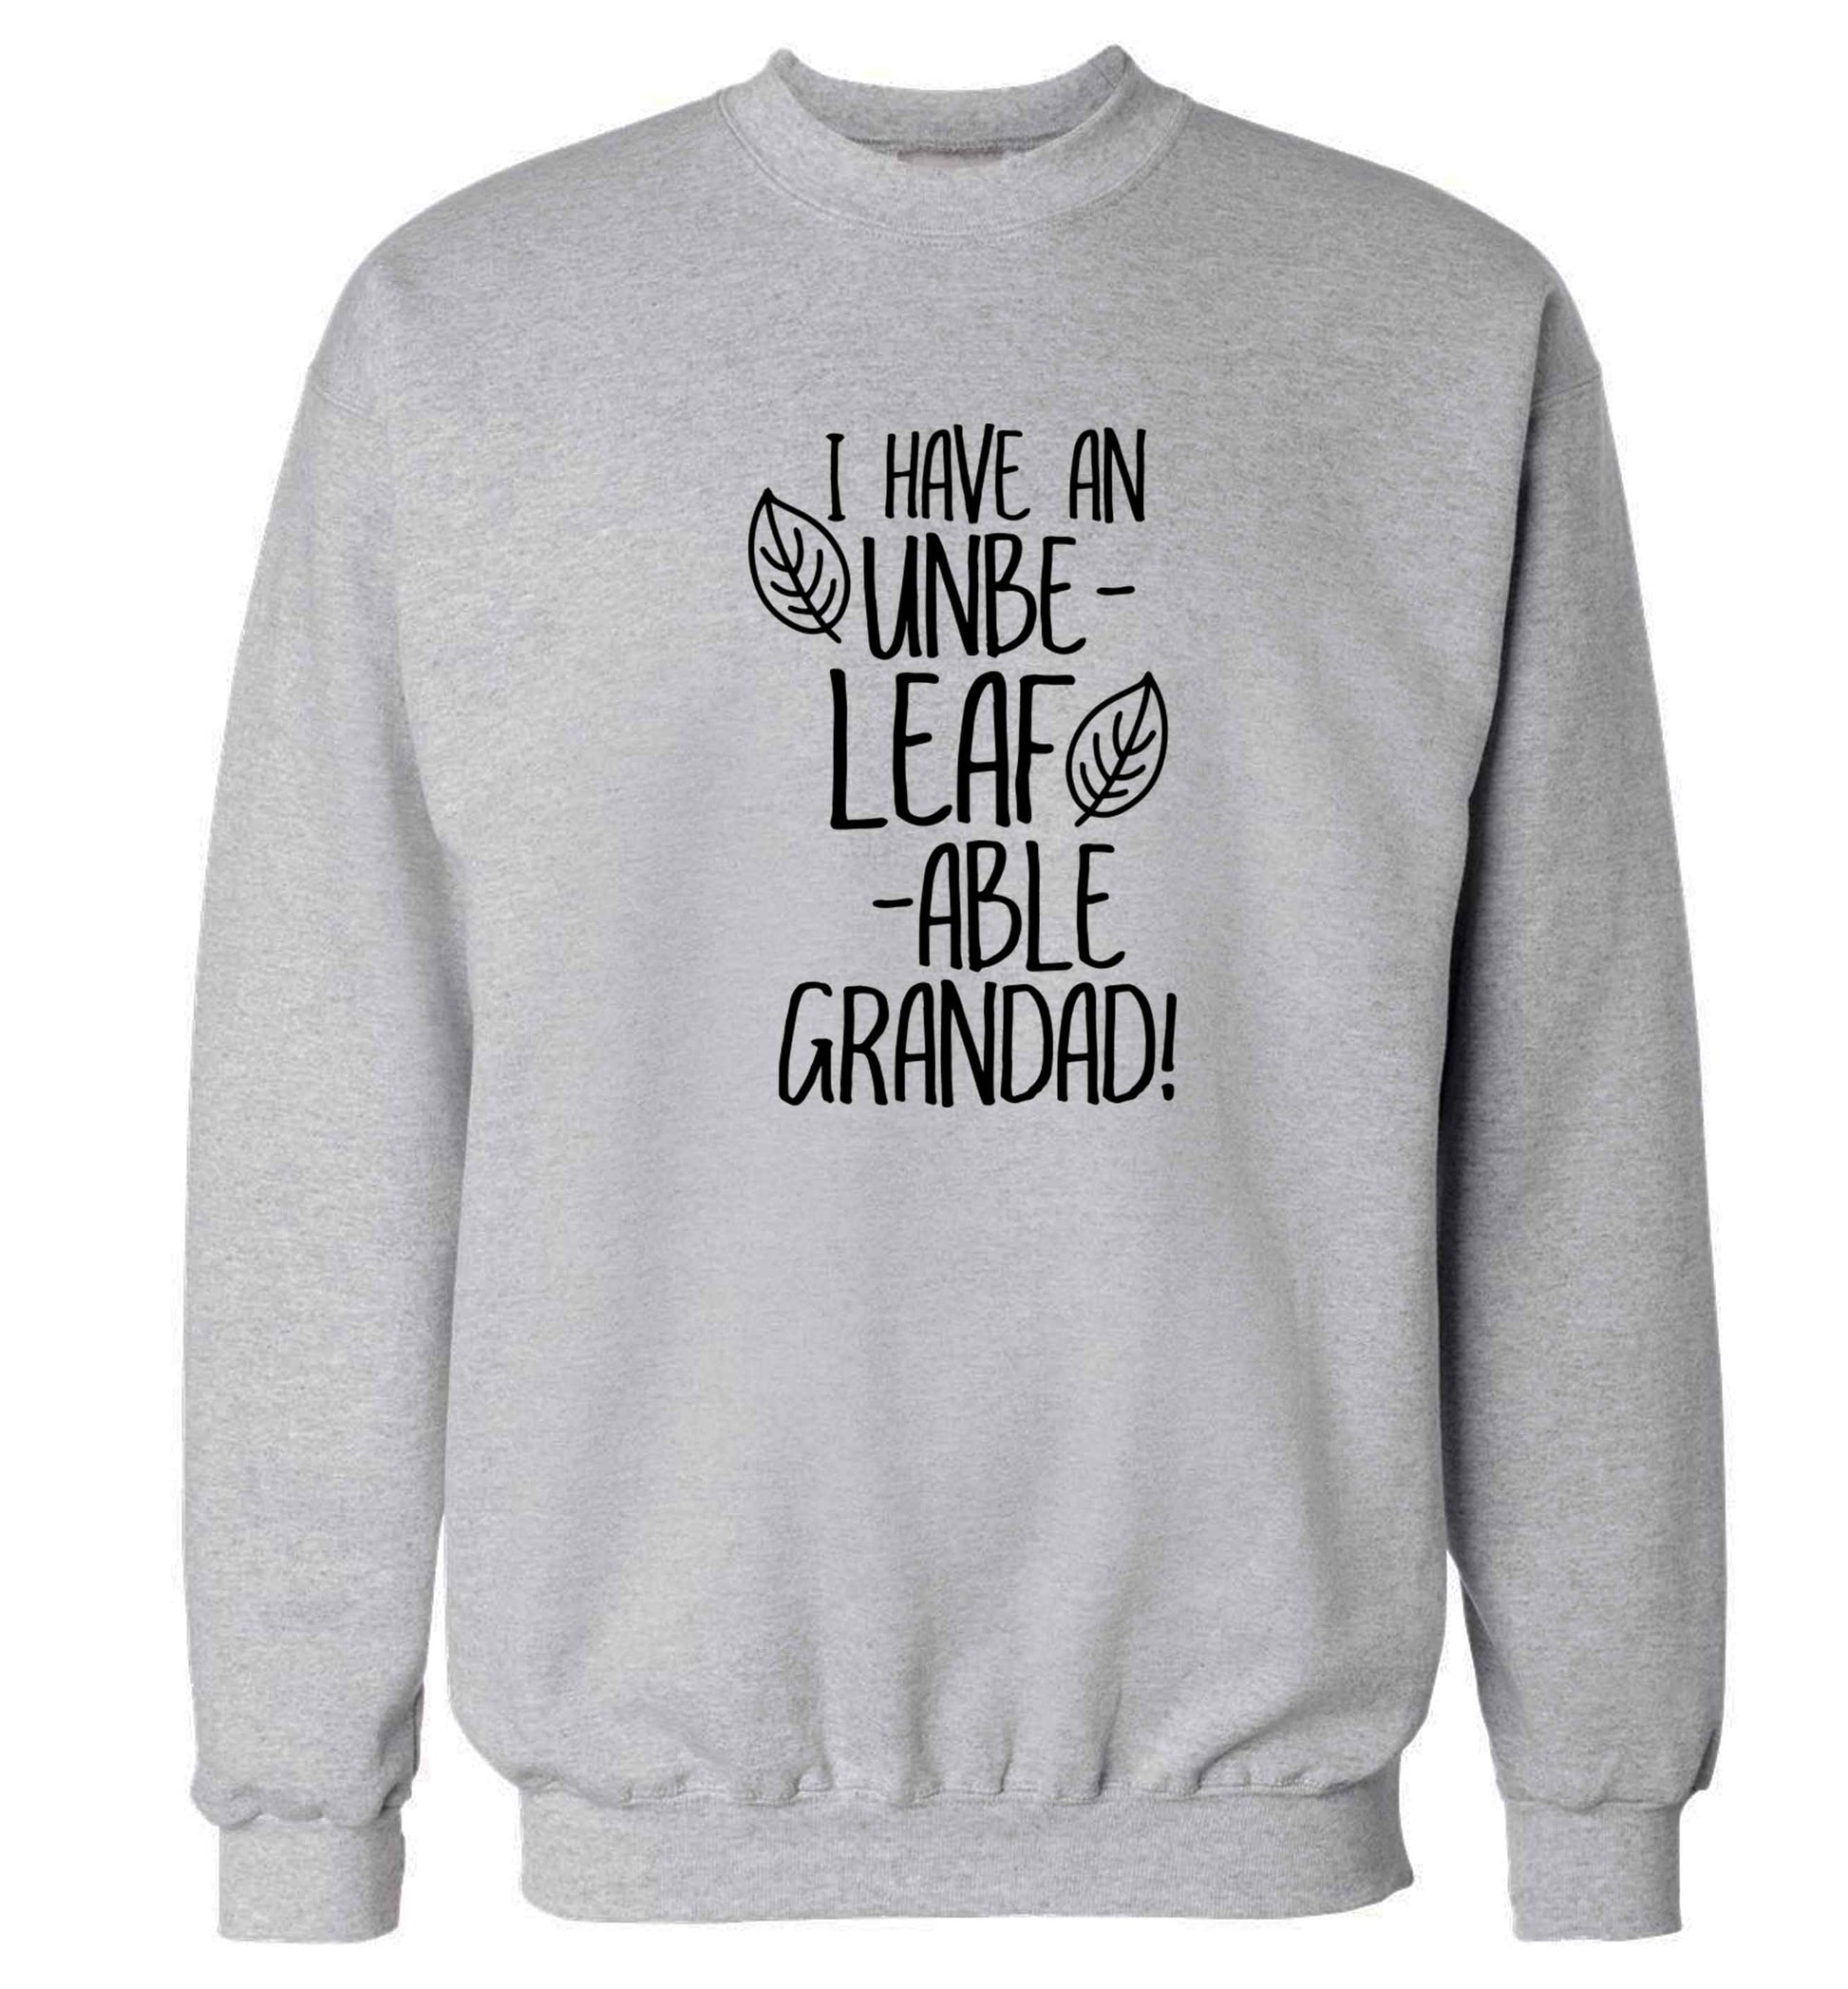 I have an unbe-leaf-able grandad Adult's unisex grey Sweater 2XL